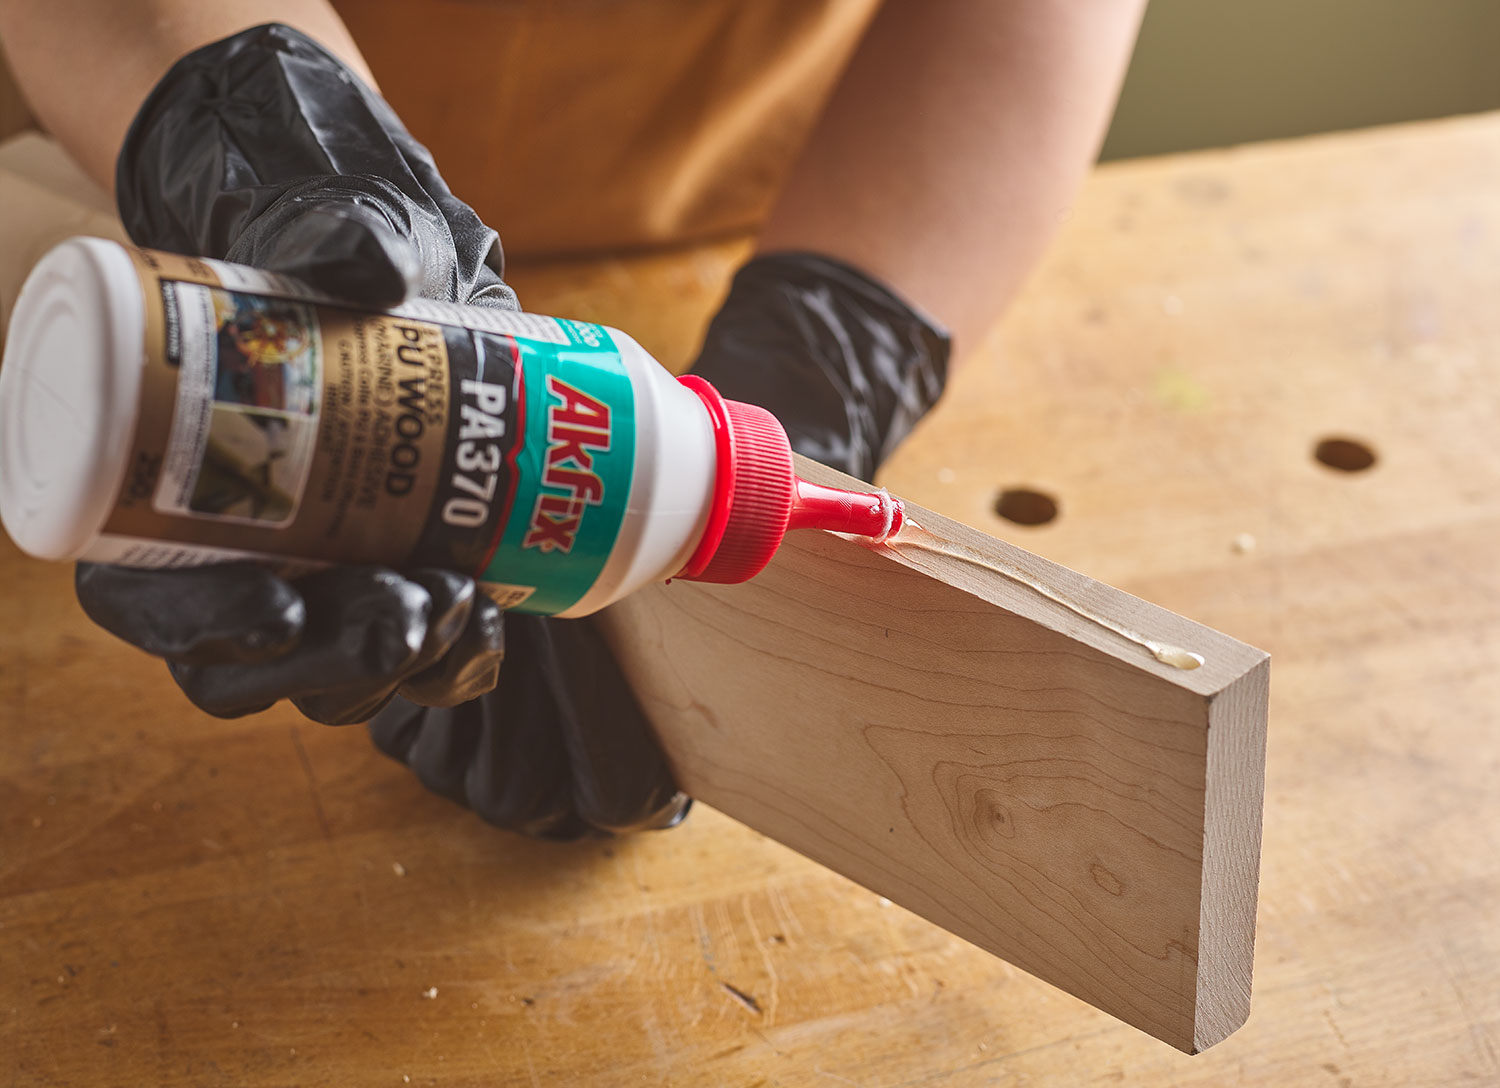 Polyurethane adhesive being applied to the edge of a wooden board.